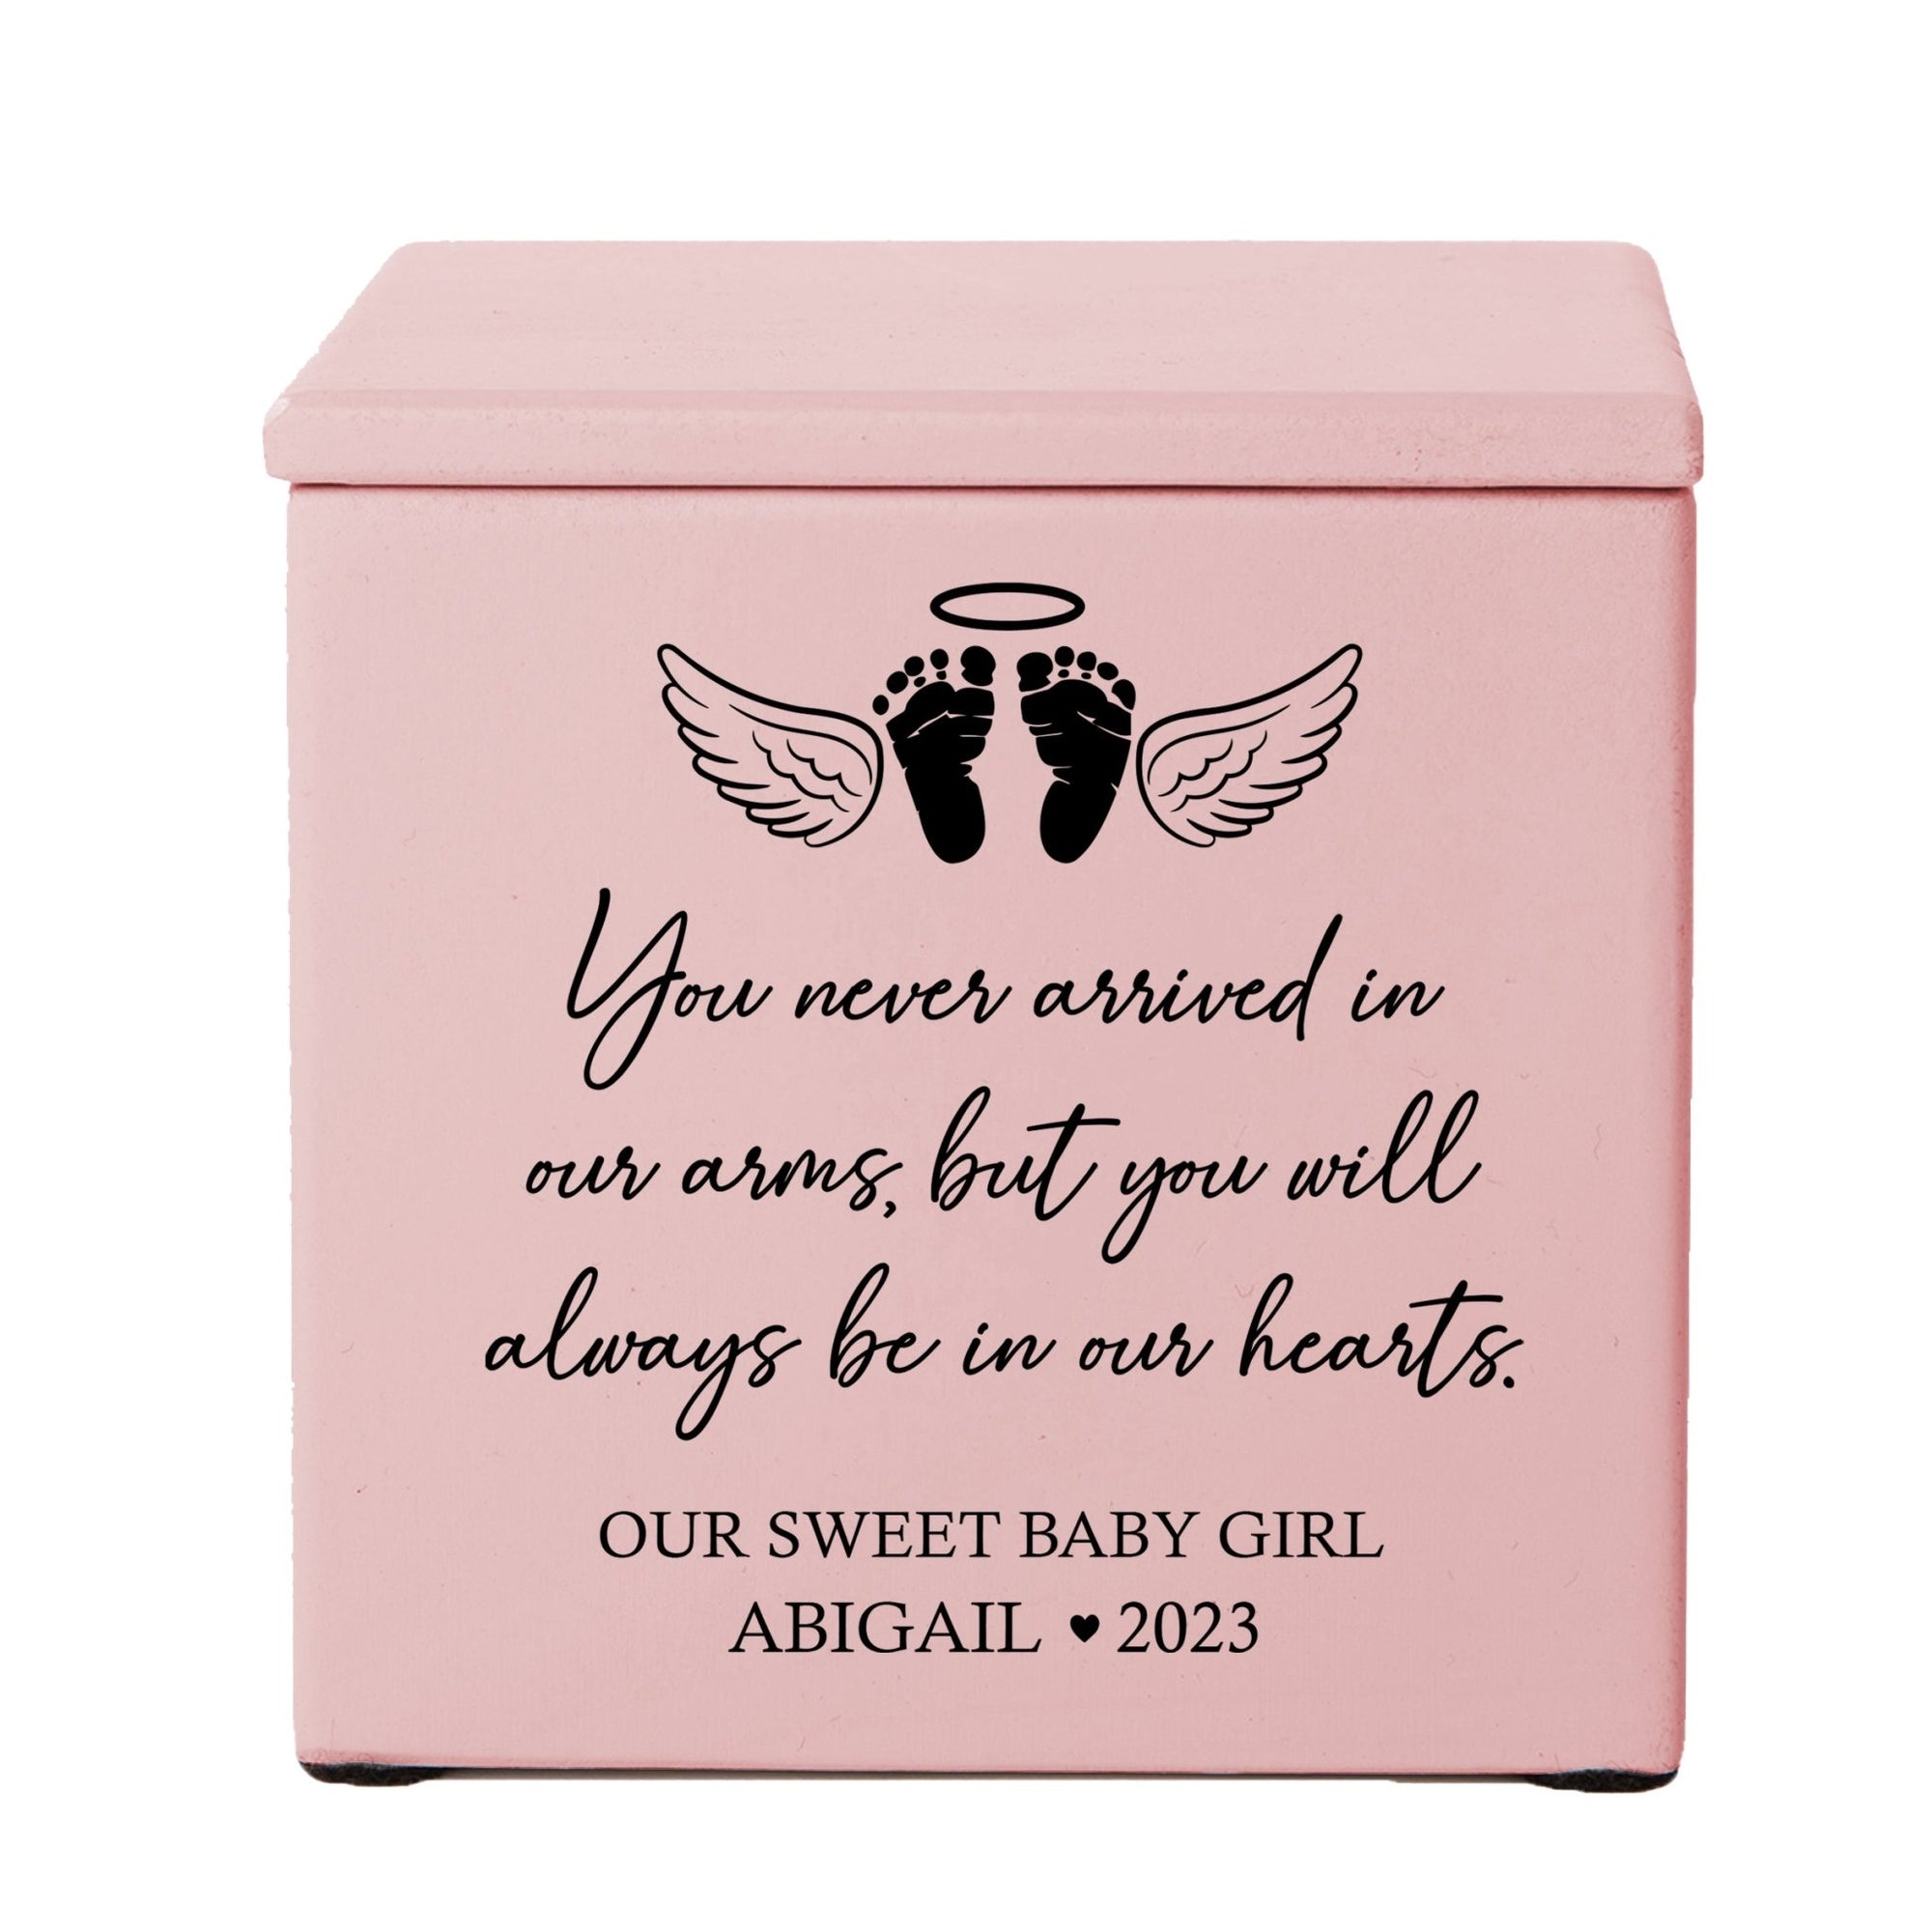 Personalized Still Born Infant Wooden Memorial Keepsake Urn For Human Ashes - You Never Arrived In Our Arms - LifeSong Milestones